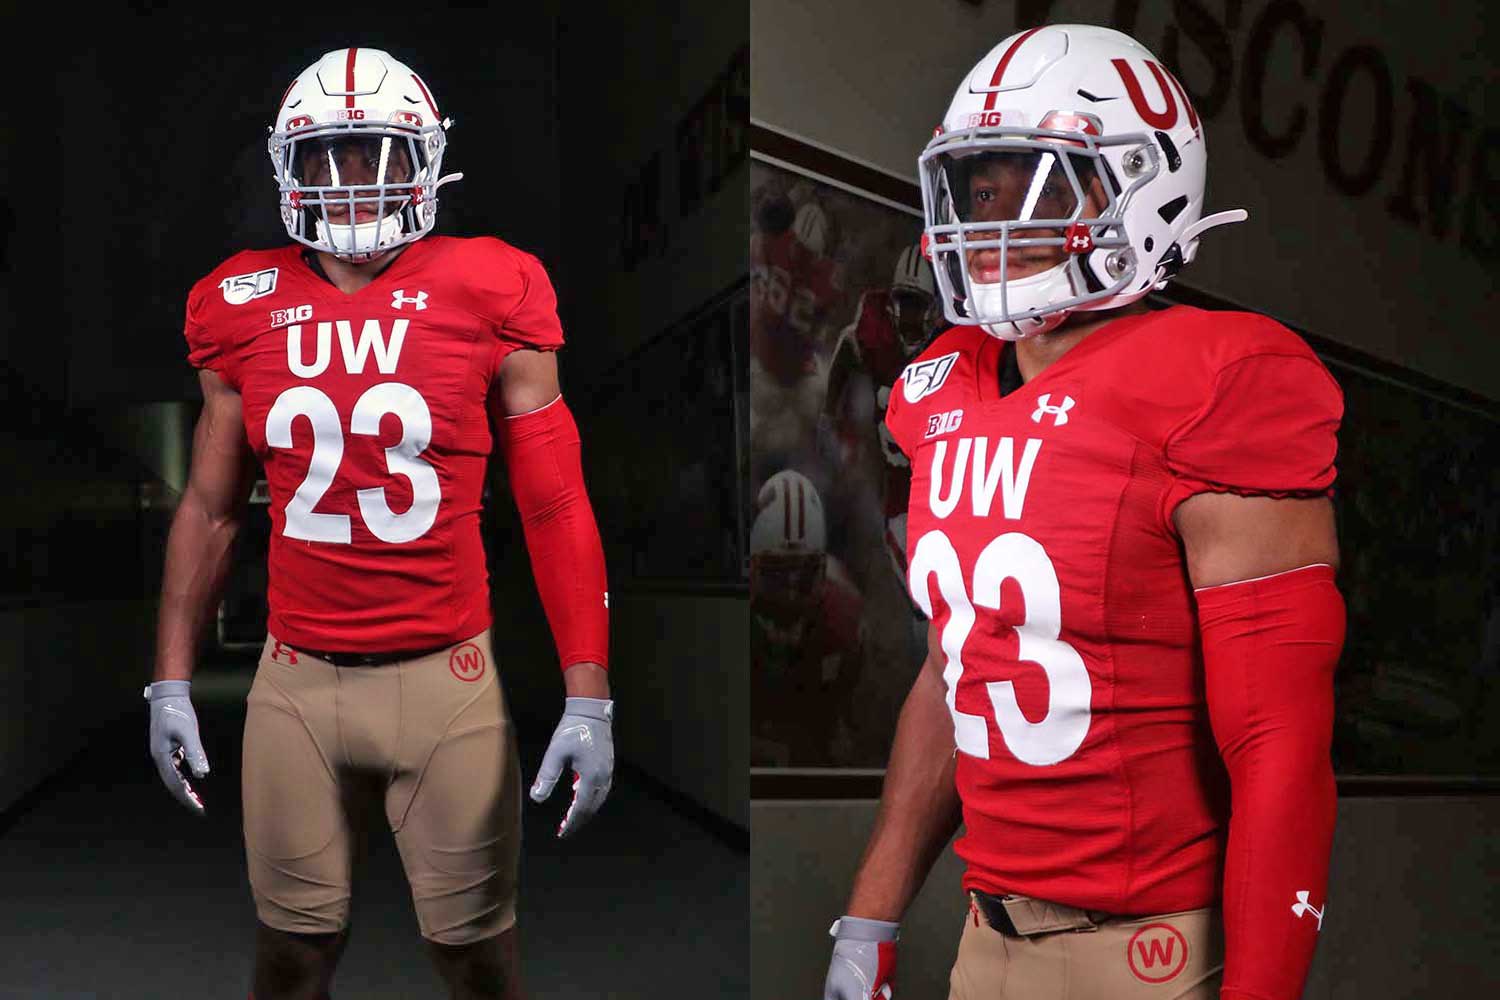 The Badgers have new throwback football 